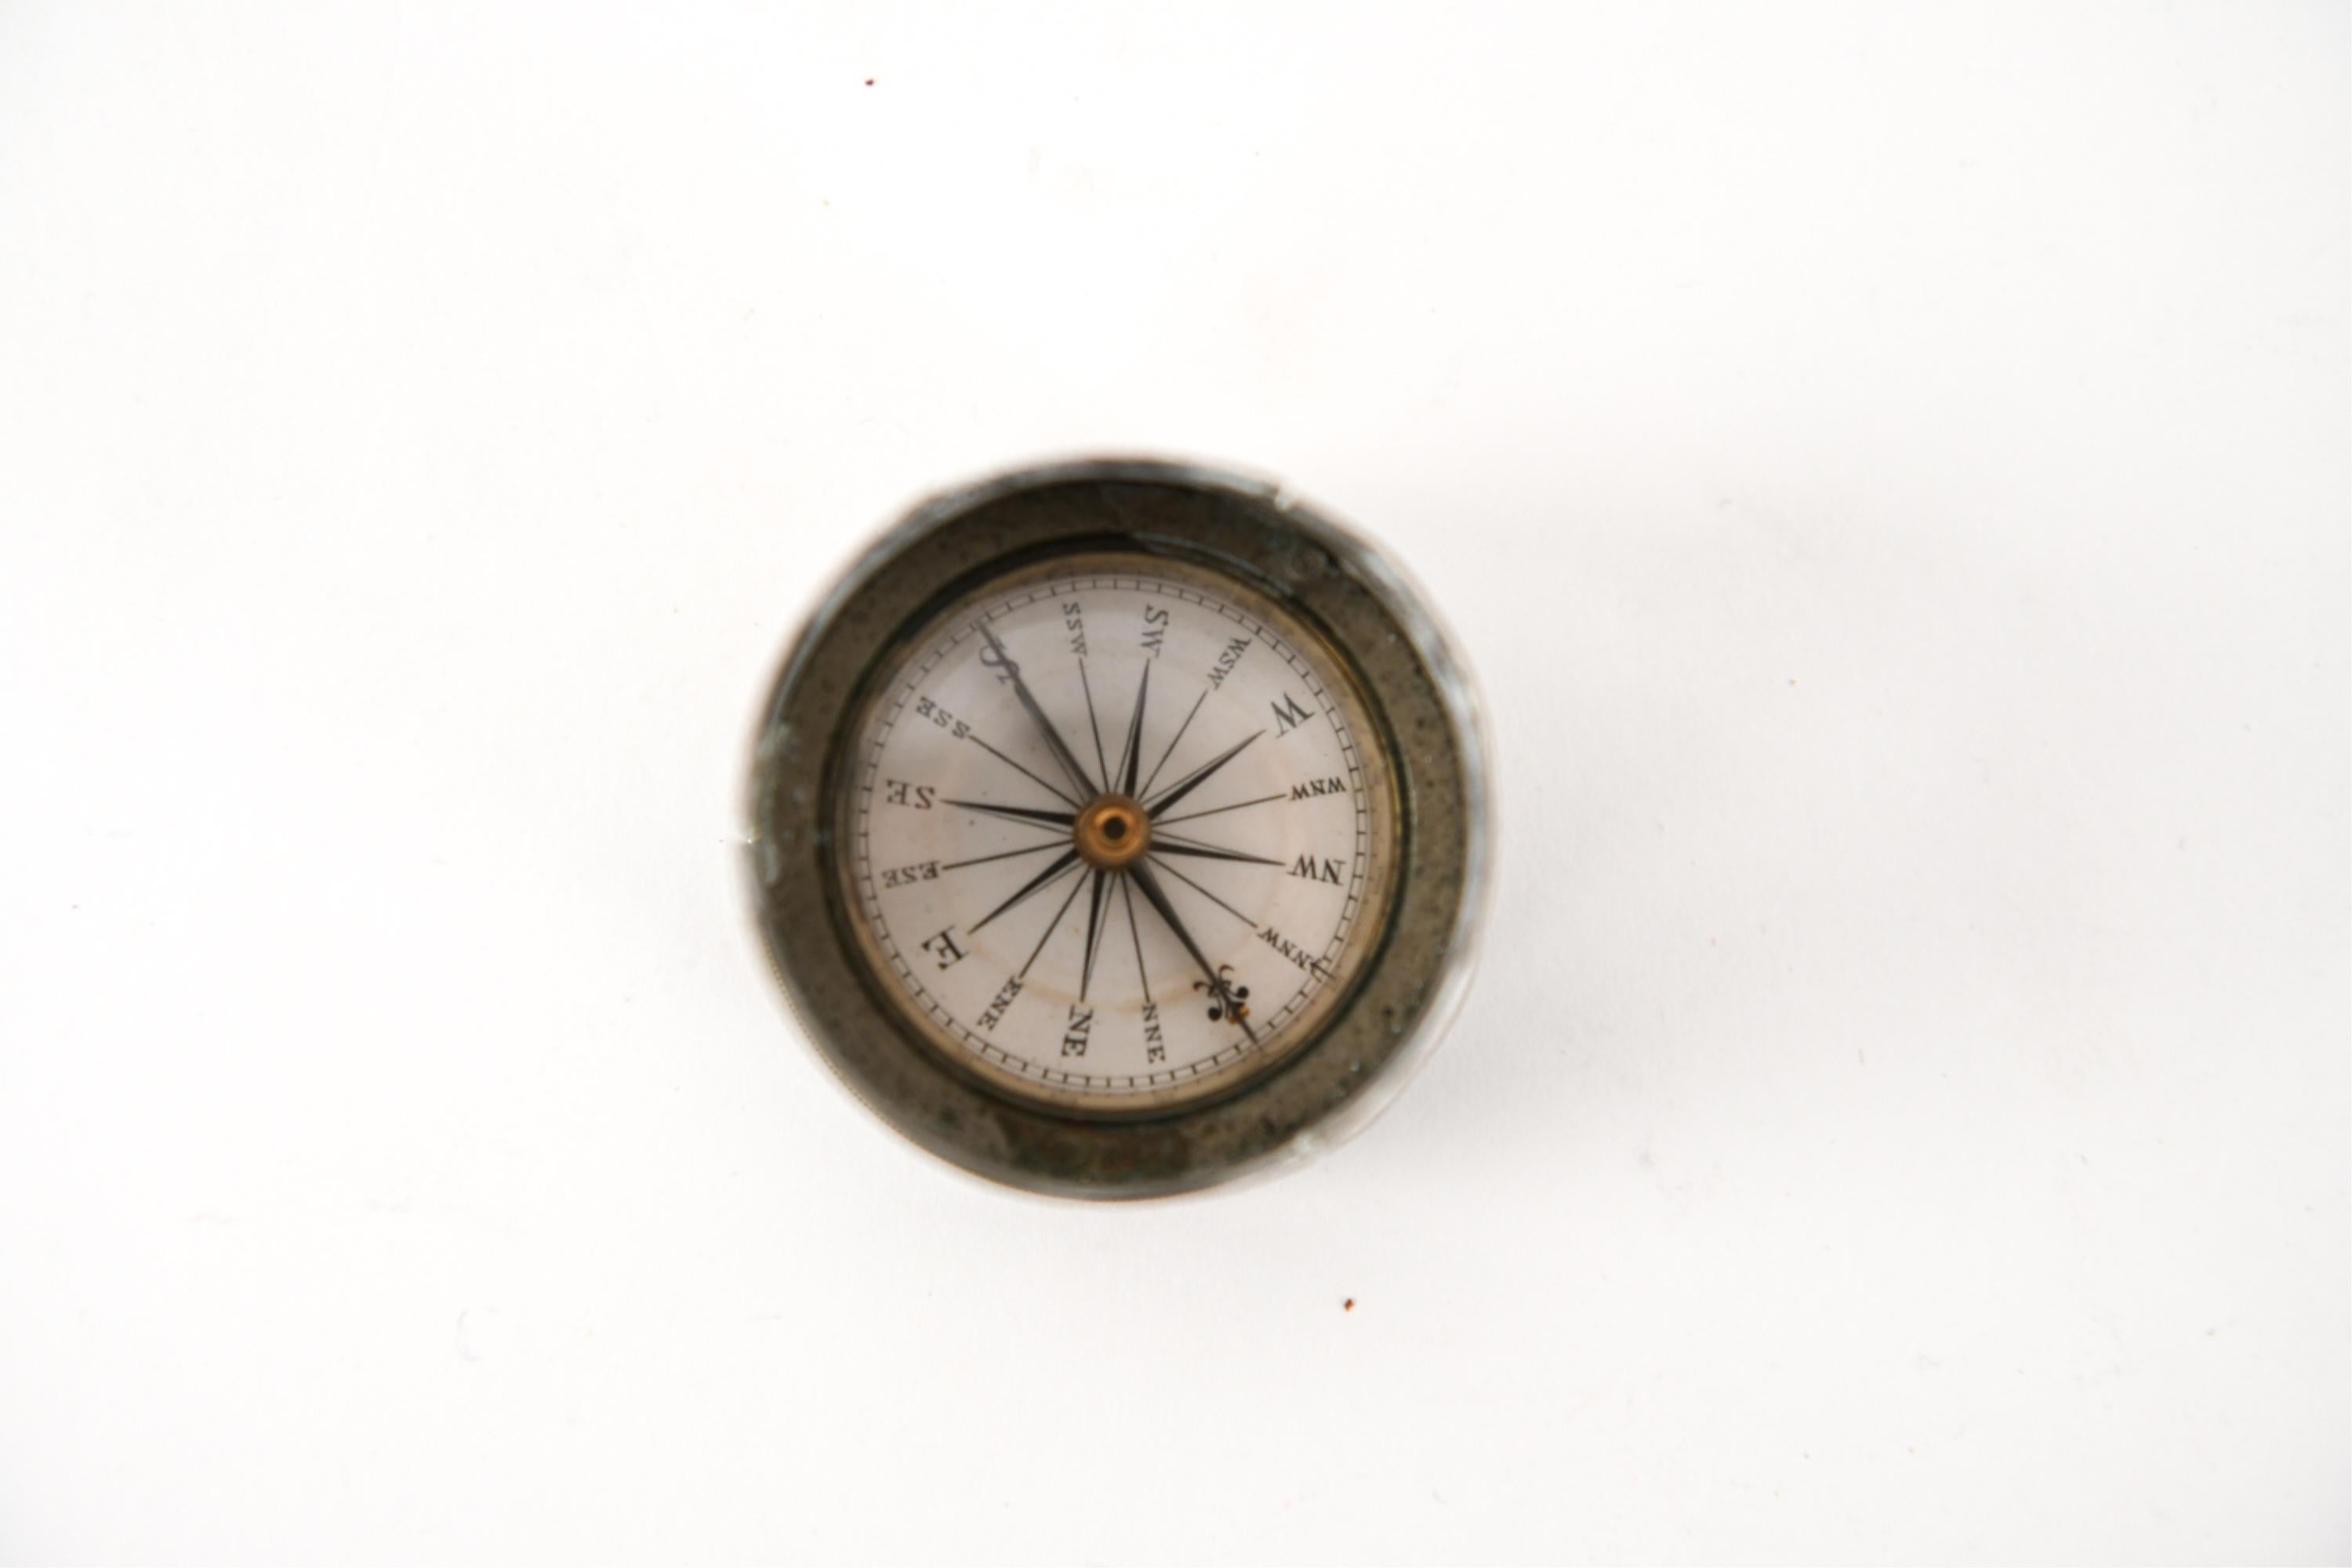 D.E. Wood Inscribed Nautical Telescope & Compass with Rosewood Barrel, c. 1860s 5